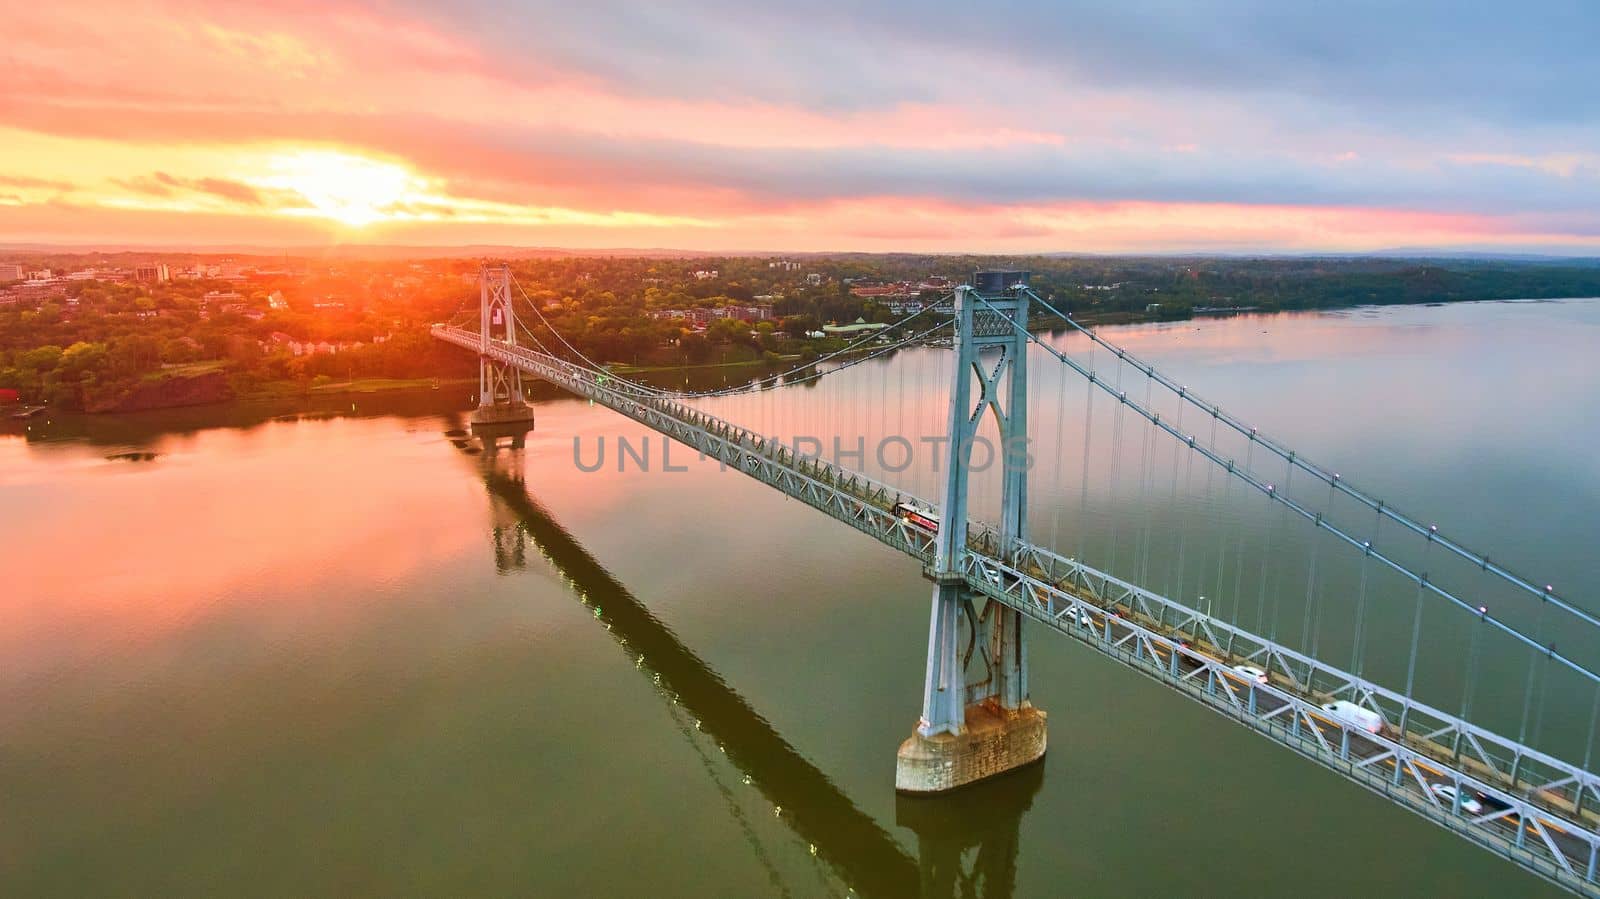 Hudson River bridge aerial with stunning pink and gold sunrise light by njproductions